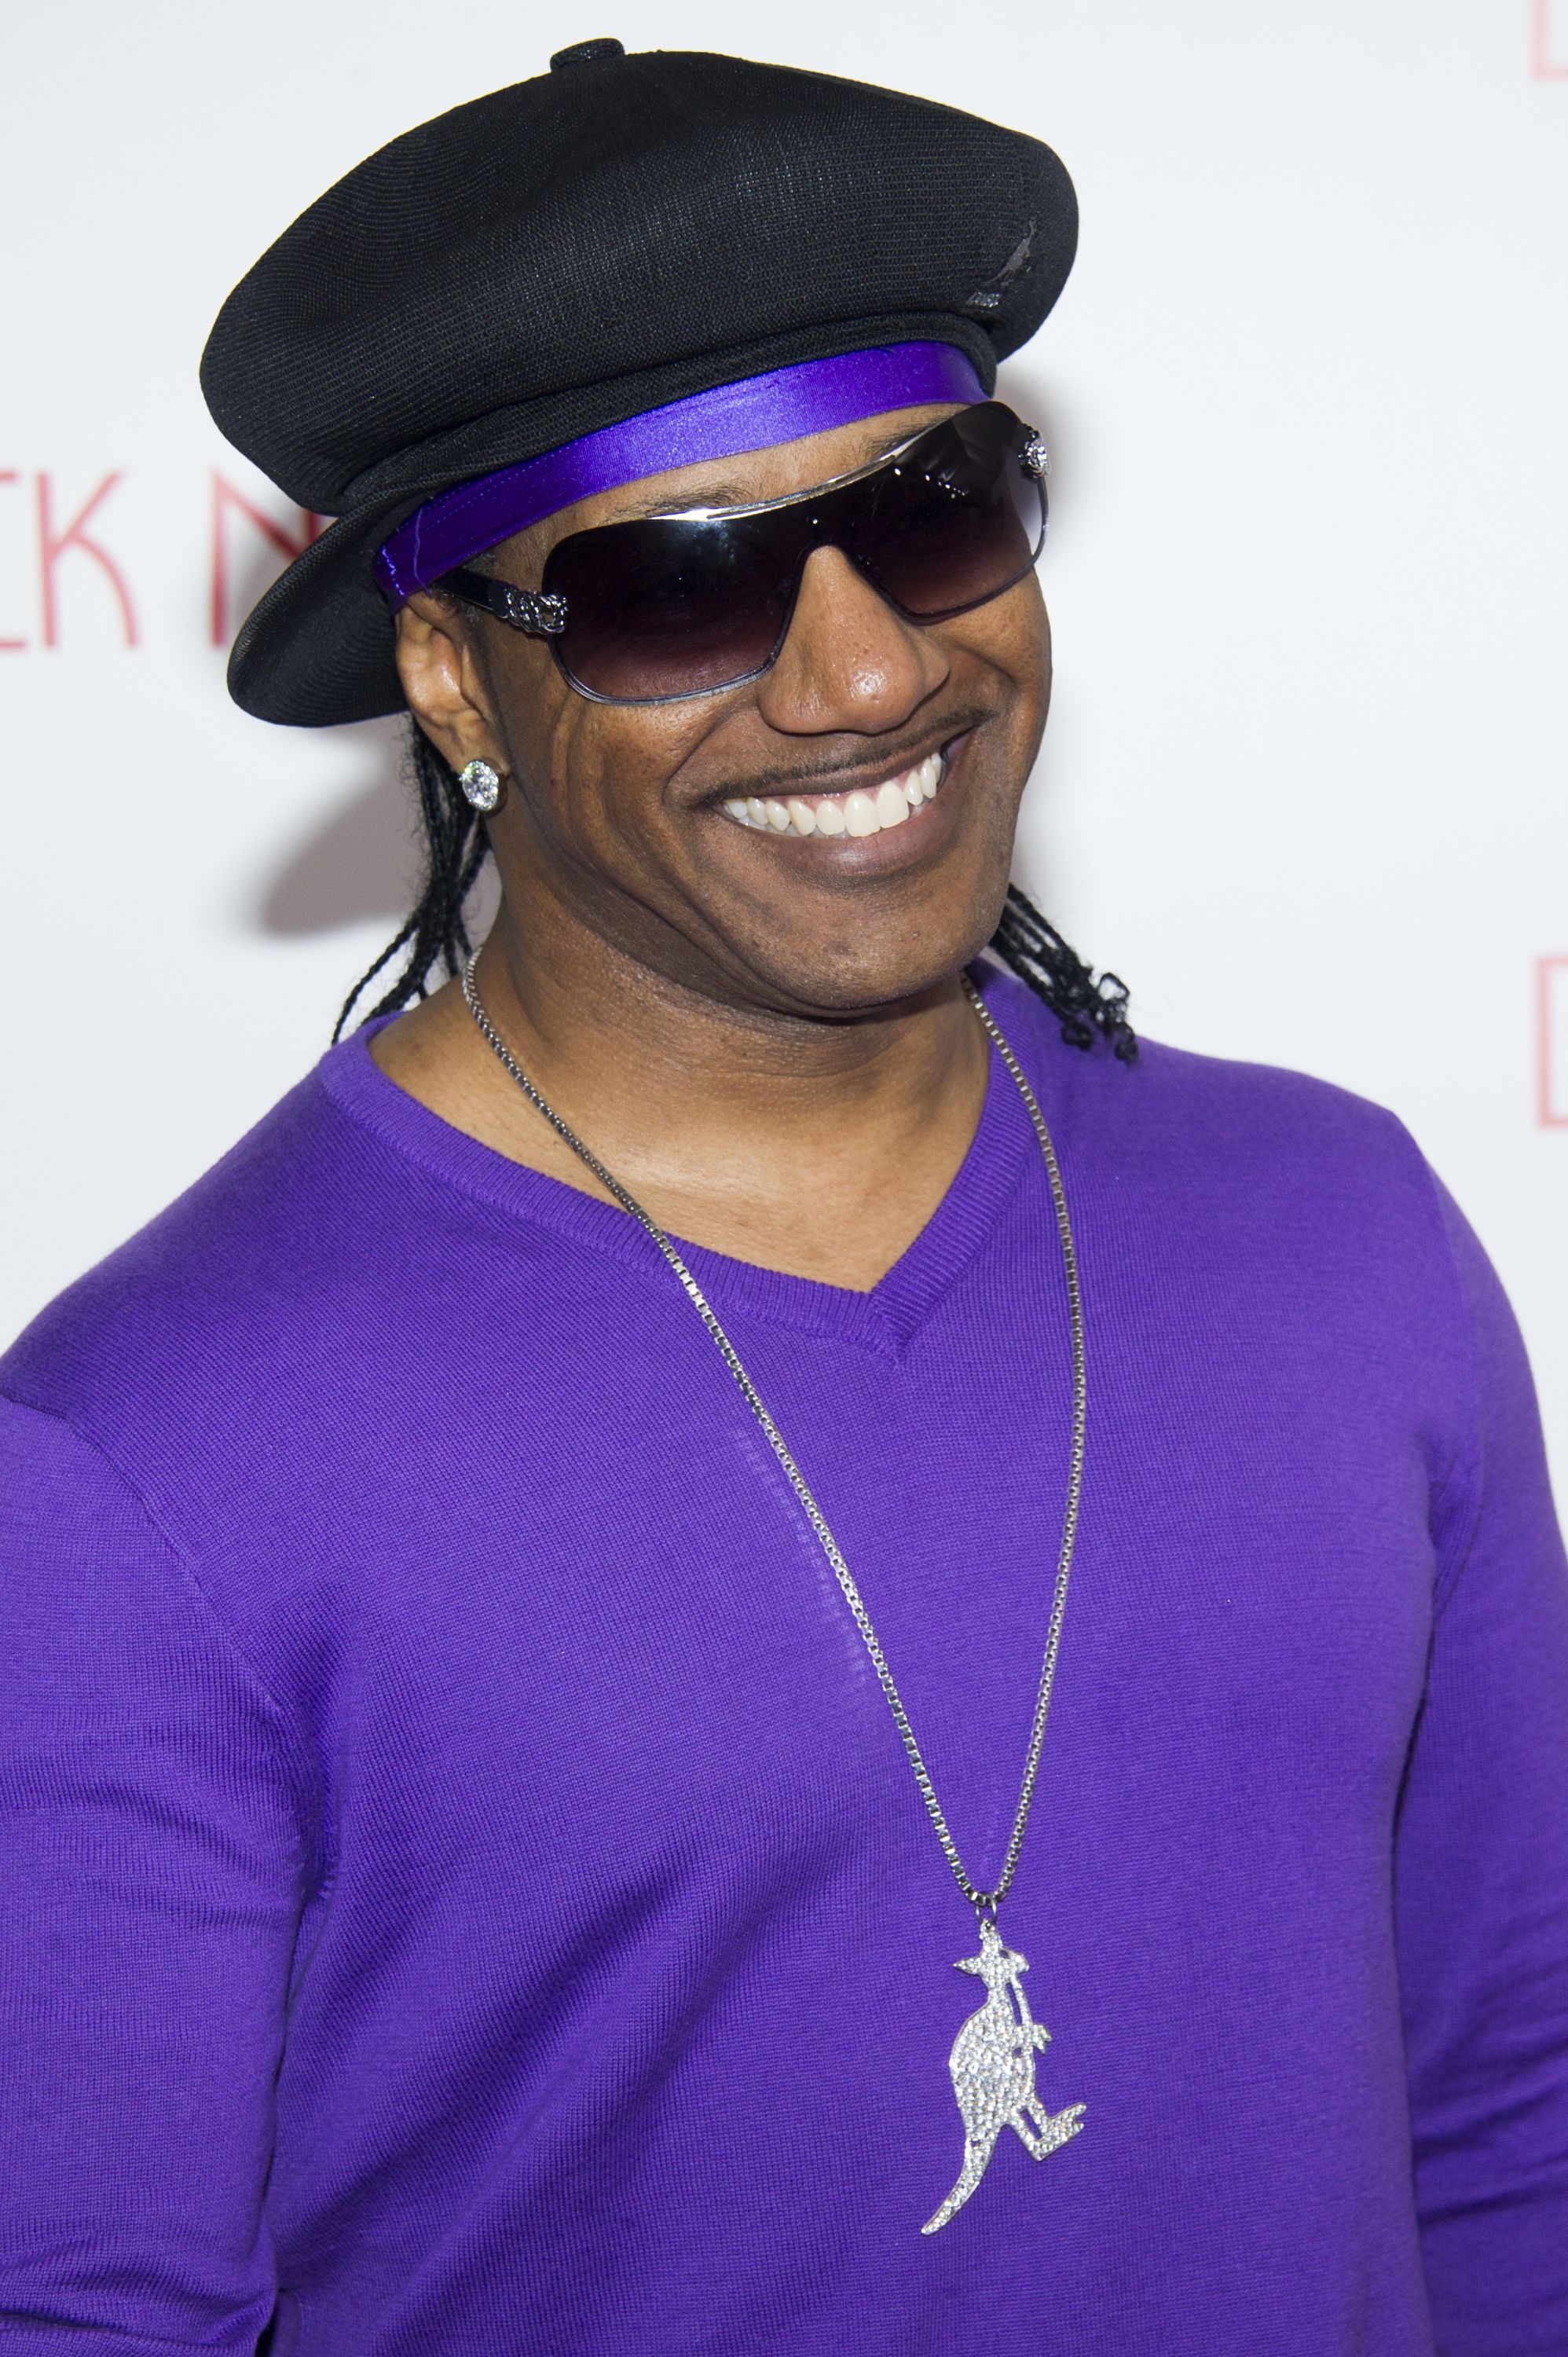 UTFO’s Kangol Kid dies after battle with cancer at 55